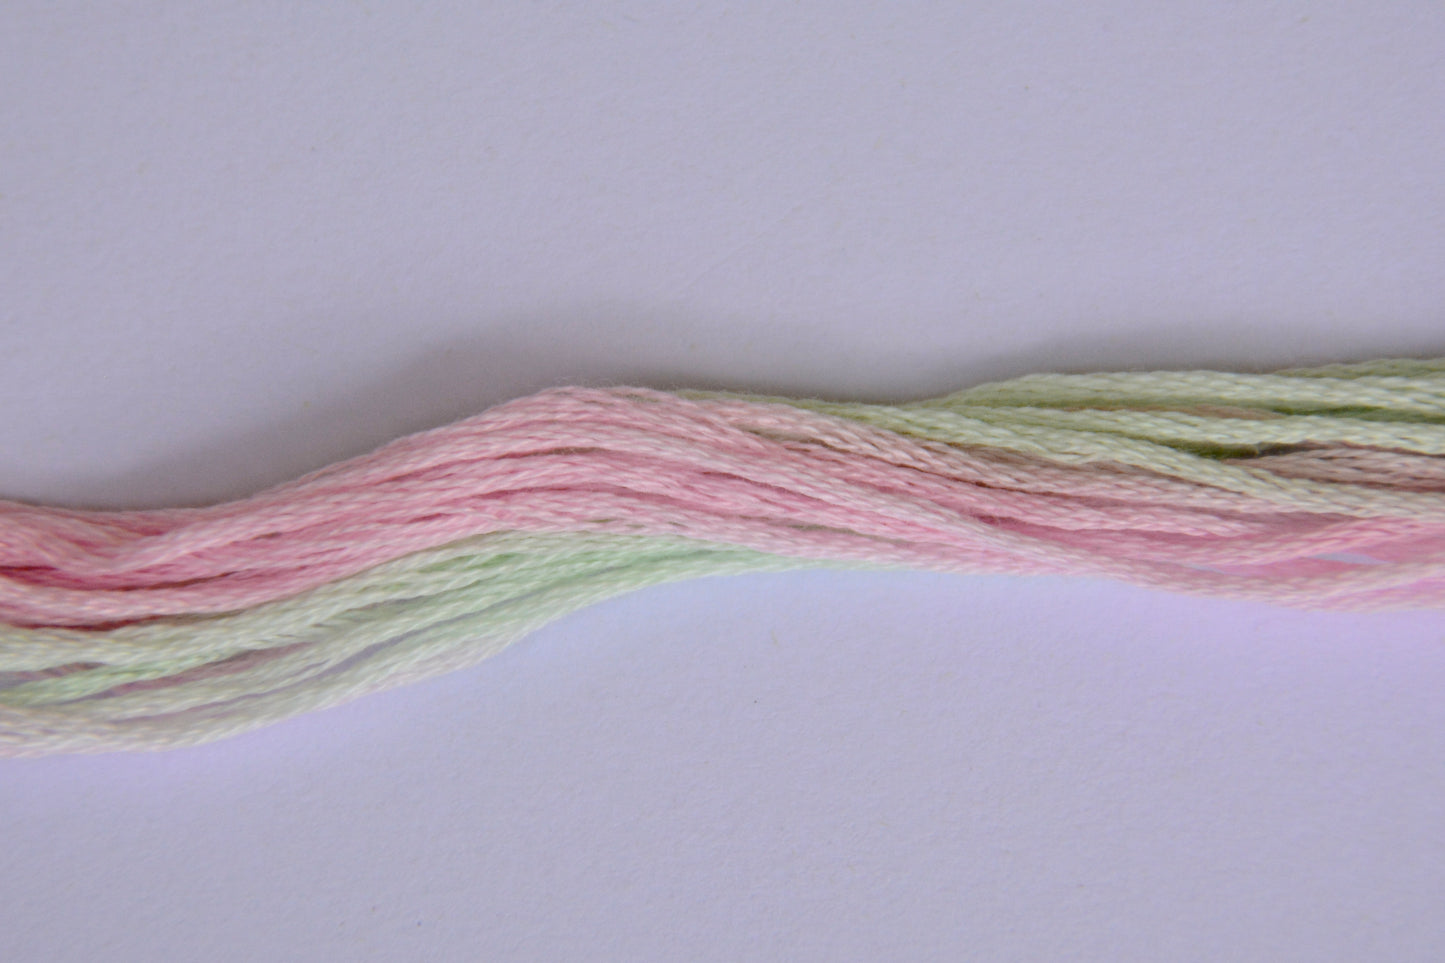 Cottage Garden  Classic Colorworks 6-Strand Hand-Dyed Embroidery Floss